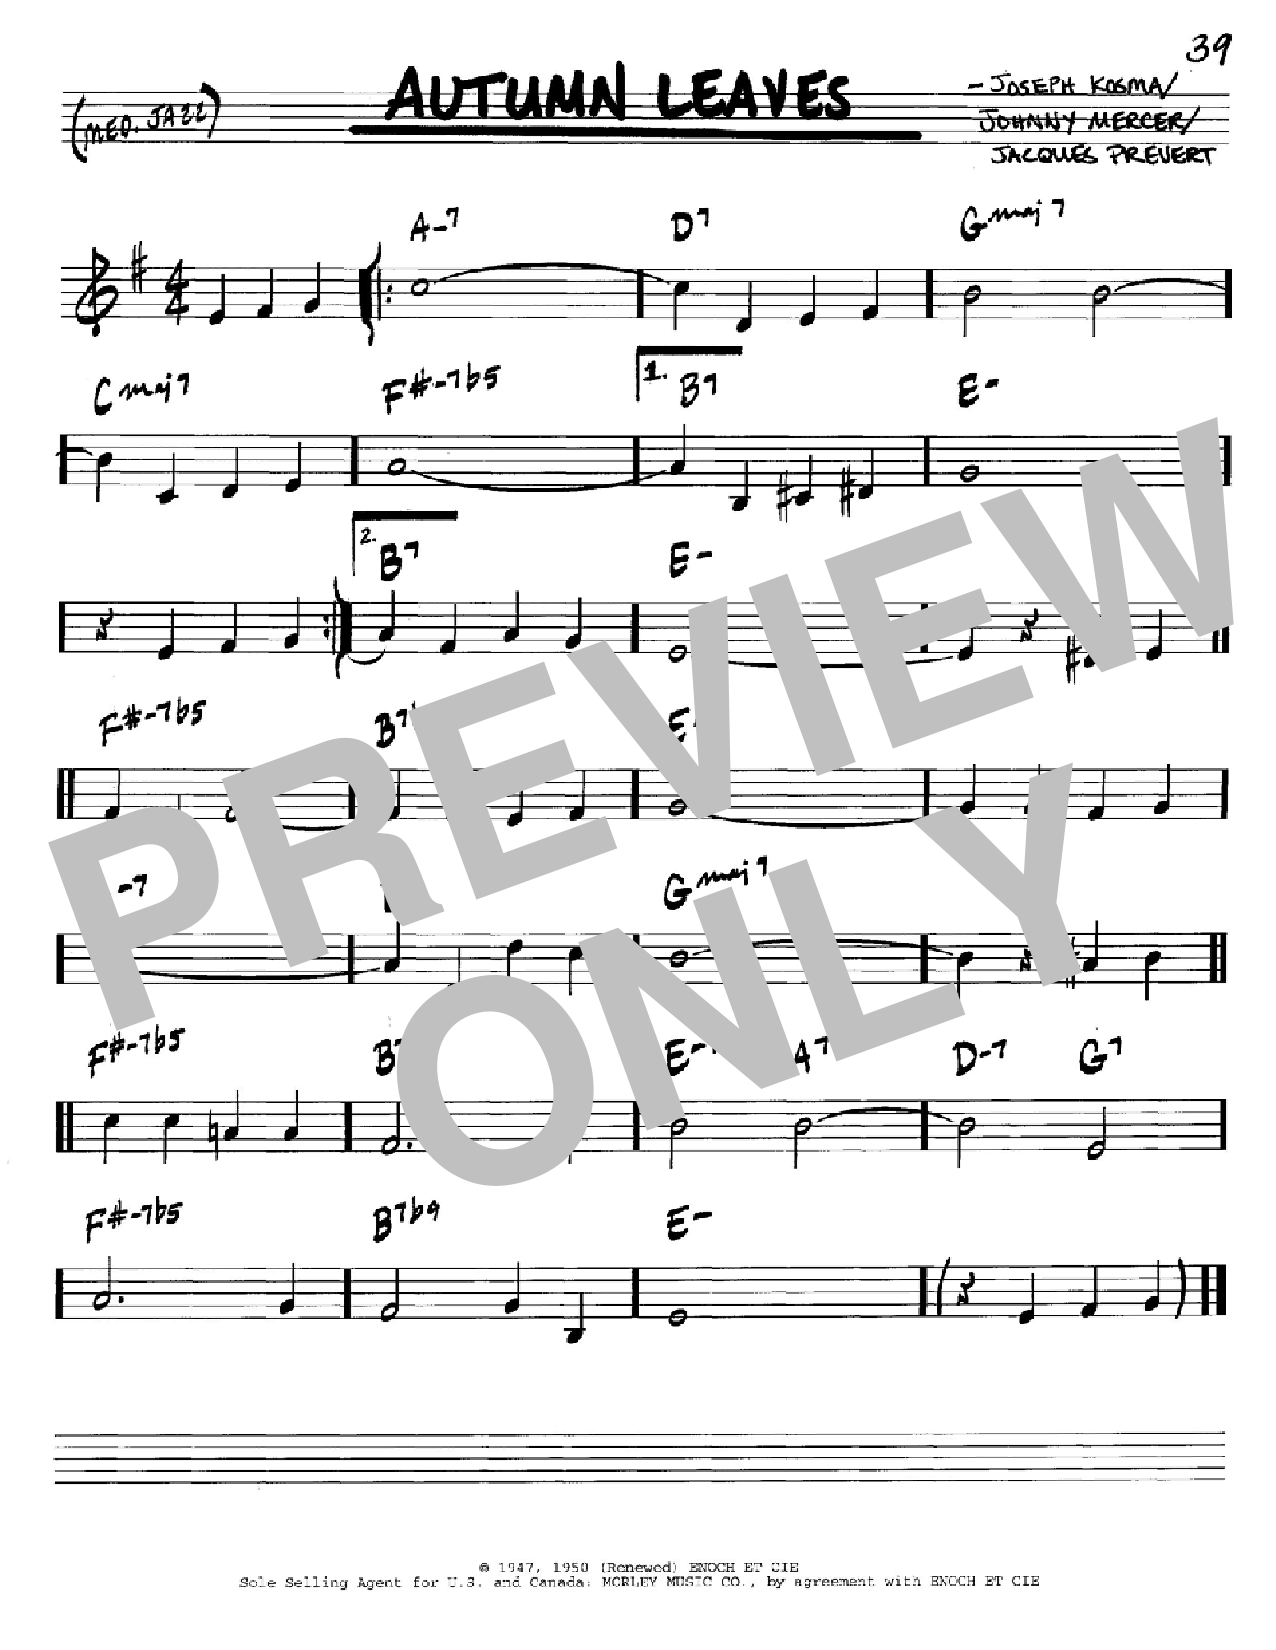 Johnny Mercer Autumn Leaves sheet music notes and chords. Download Printable PDF.